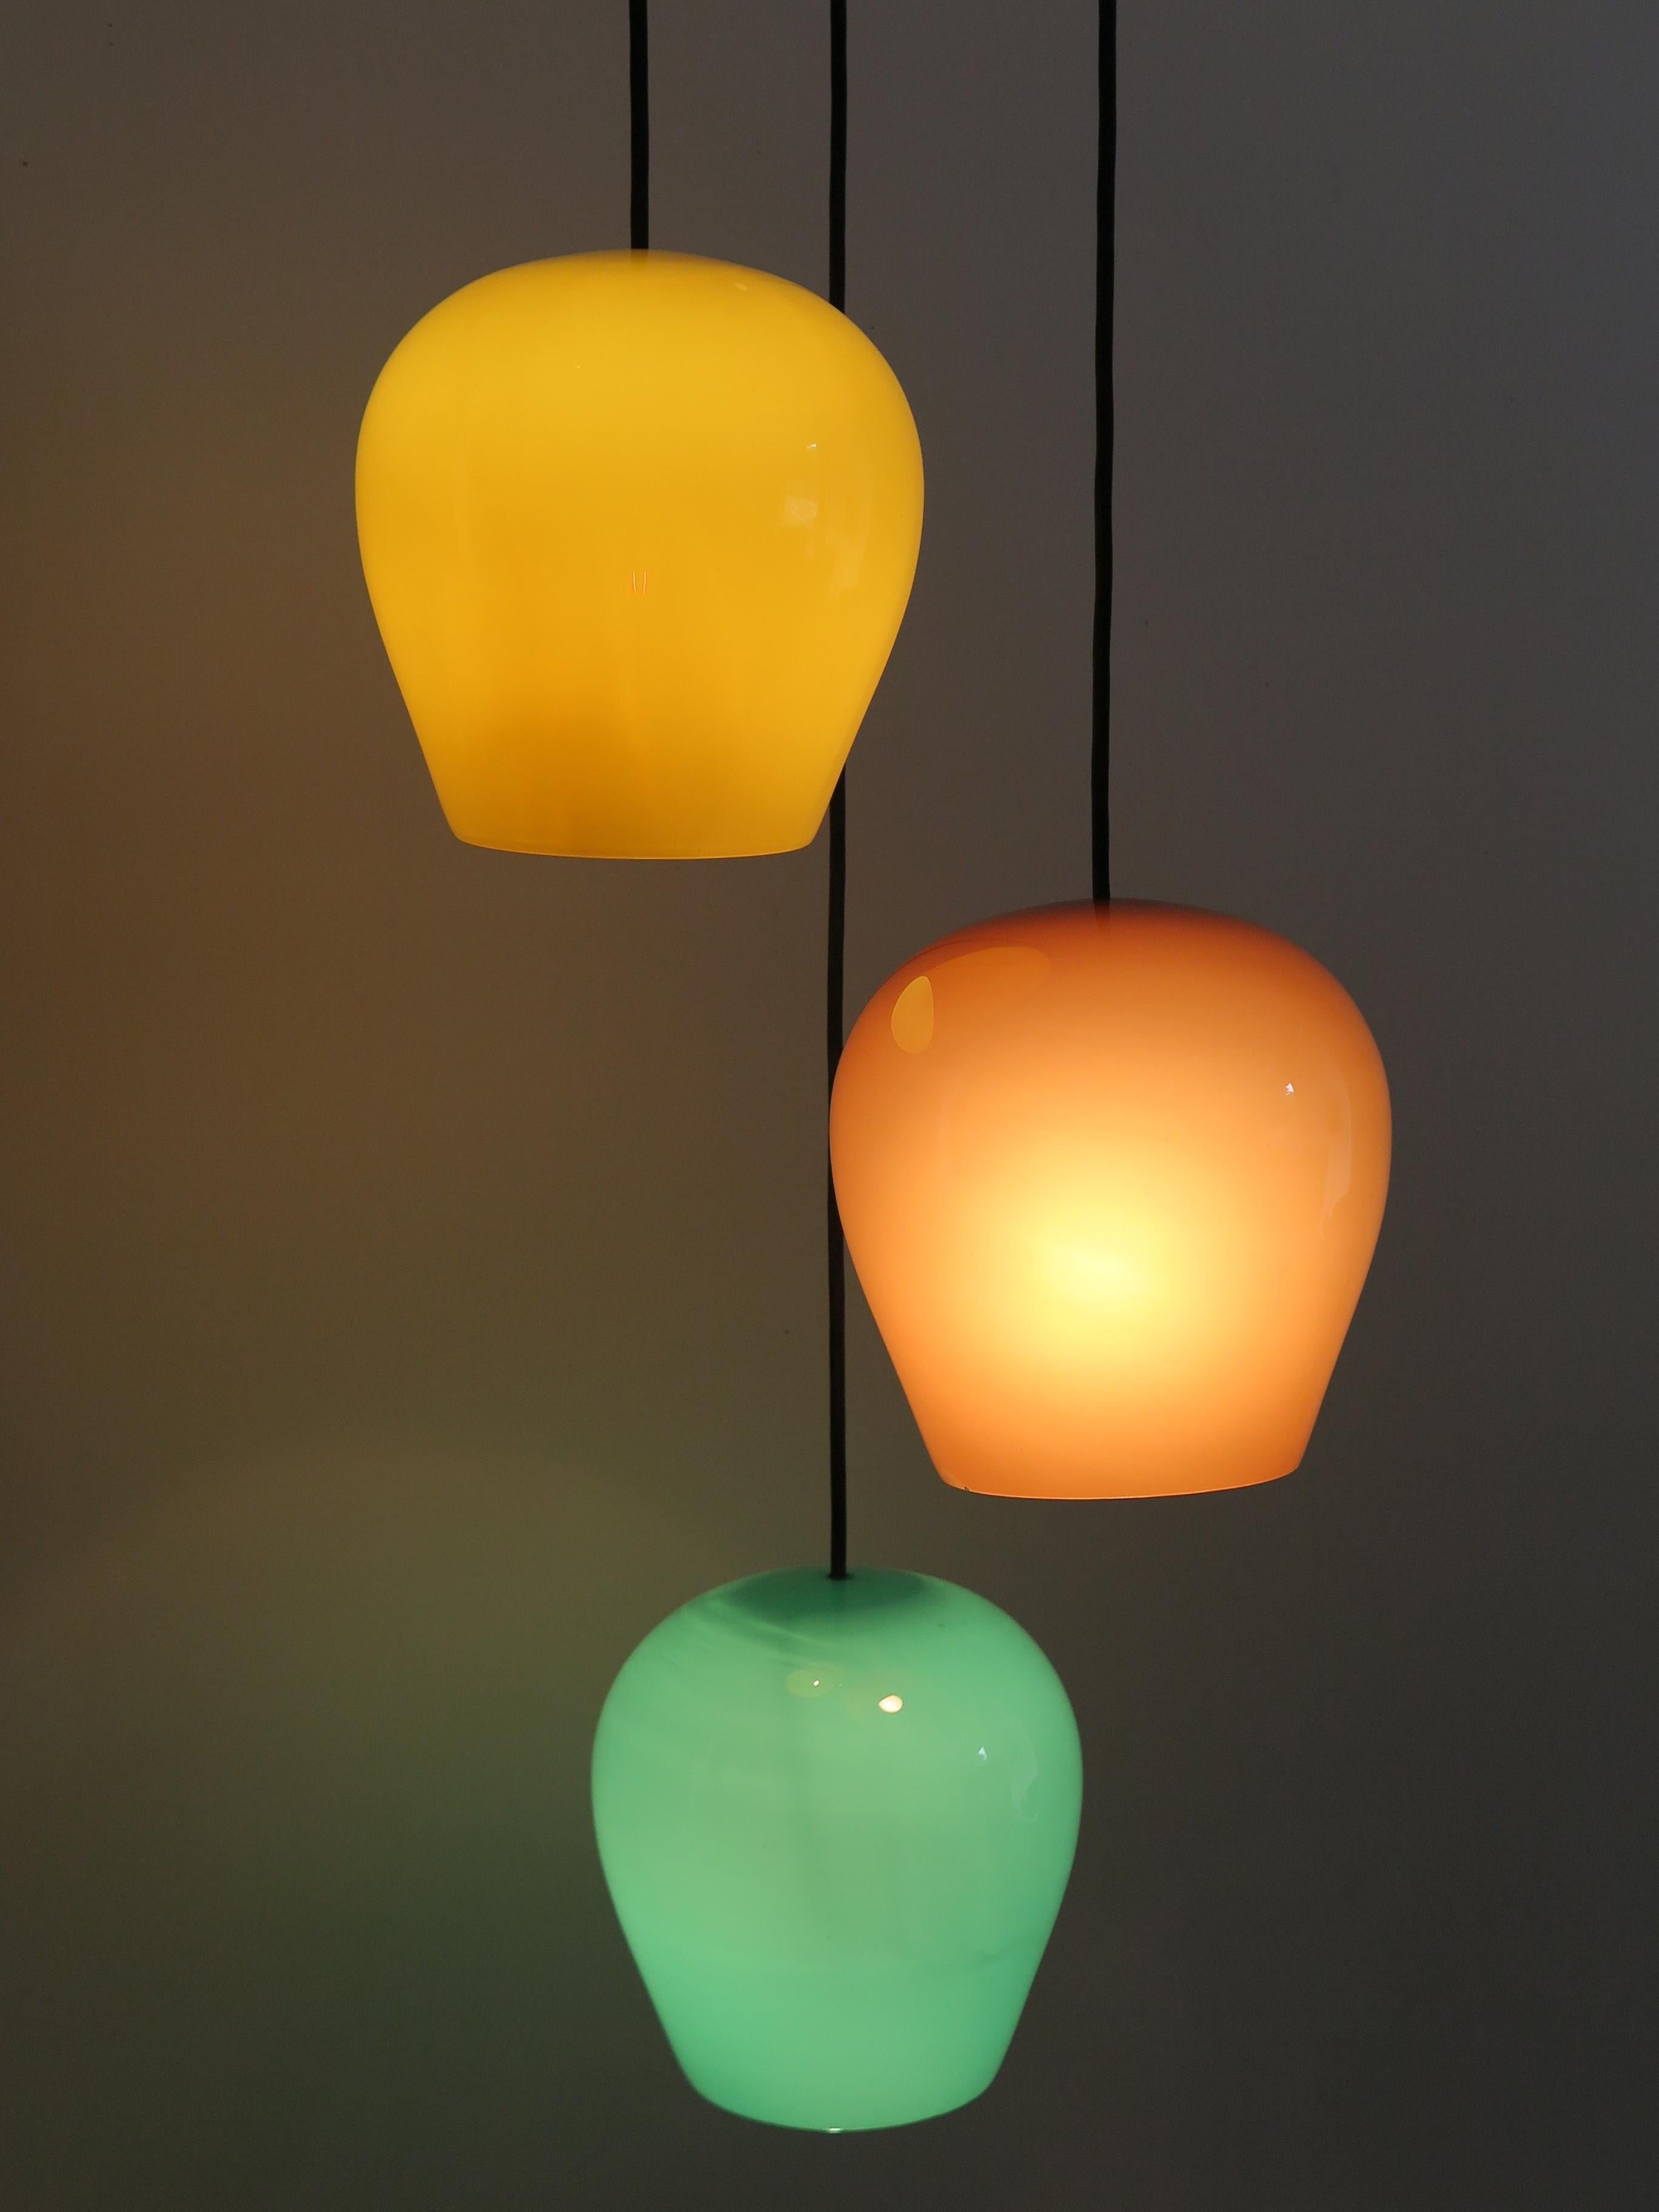 Italian Mid-Century Modern pendant lamp designed by Massimo Vignelli for Venini Murano with colored glass and polished brass, circa 1955. All original, electrical parts, all vintage, working.
Measure: Diffuser colored glass diameter 24